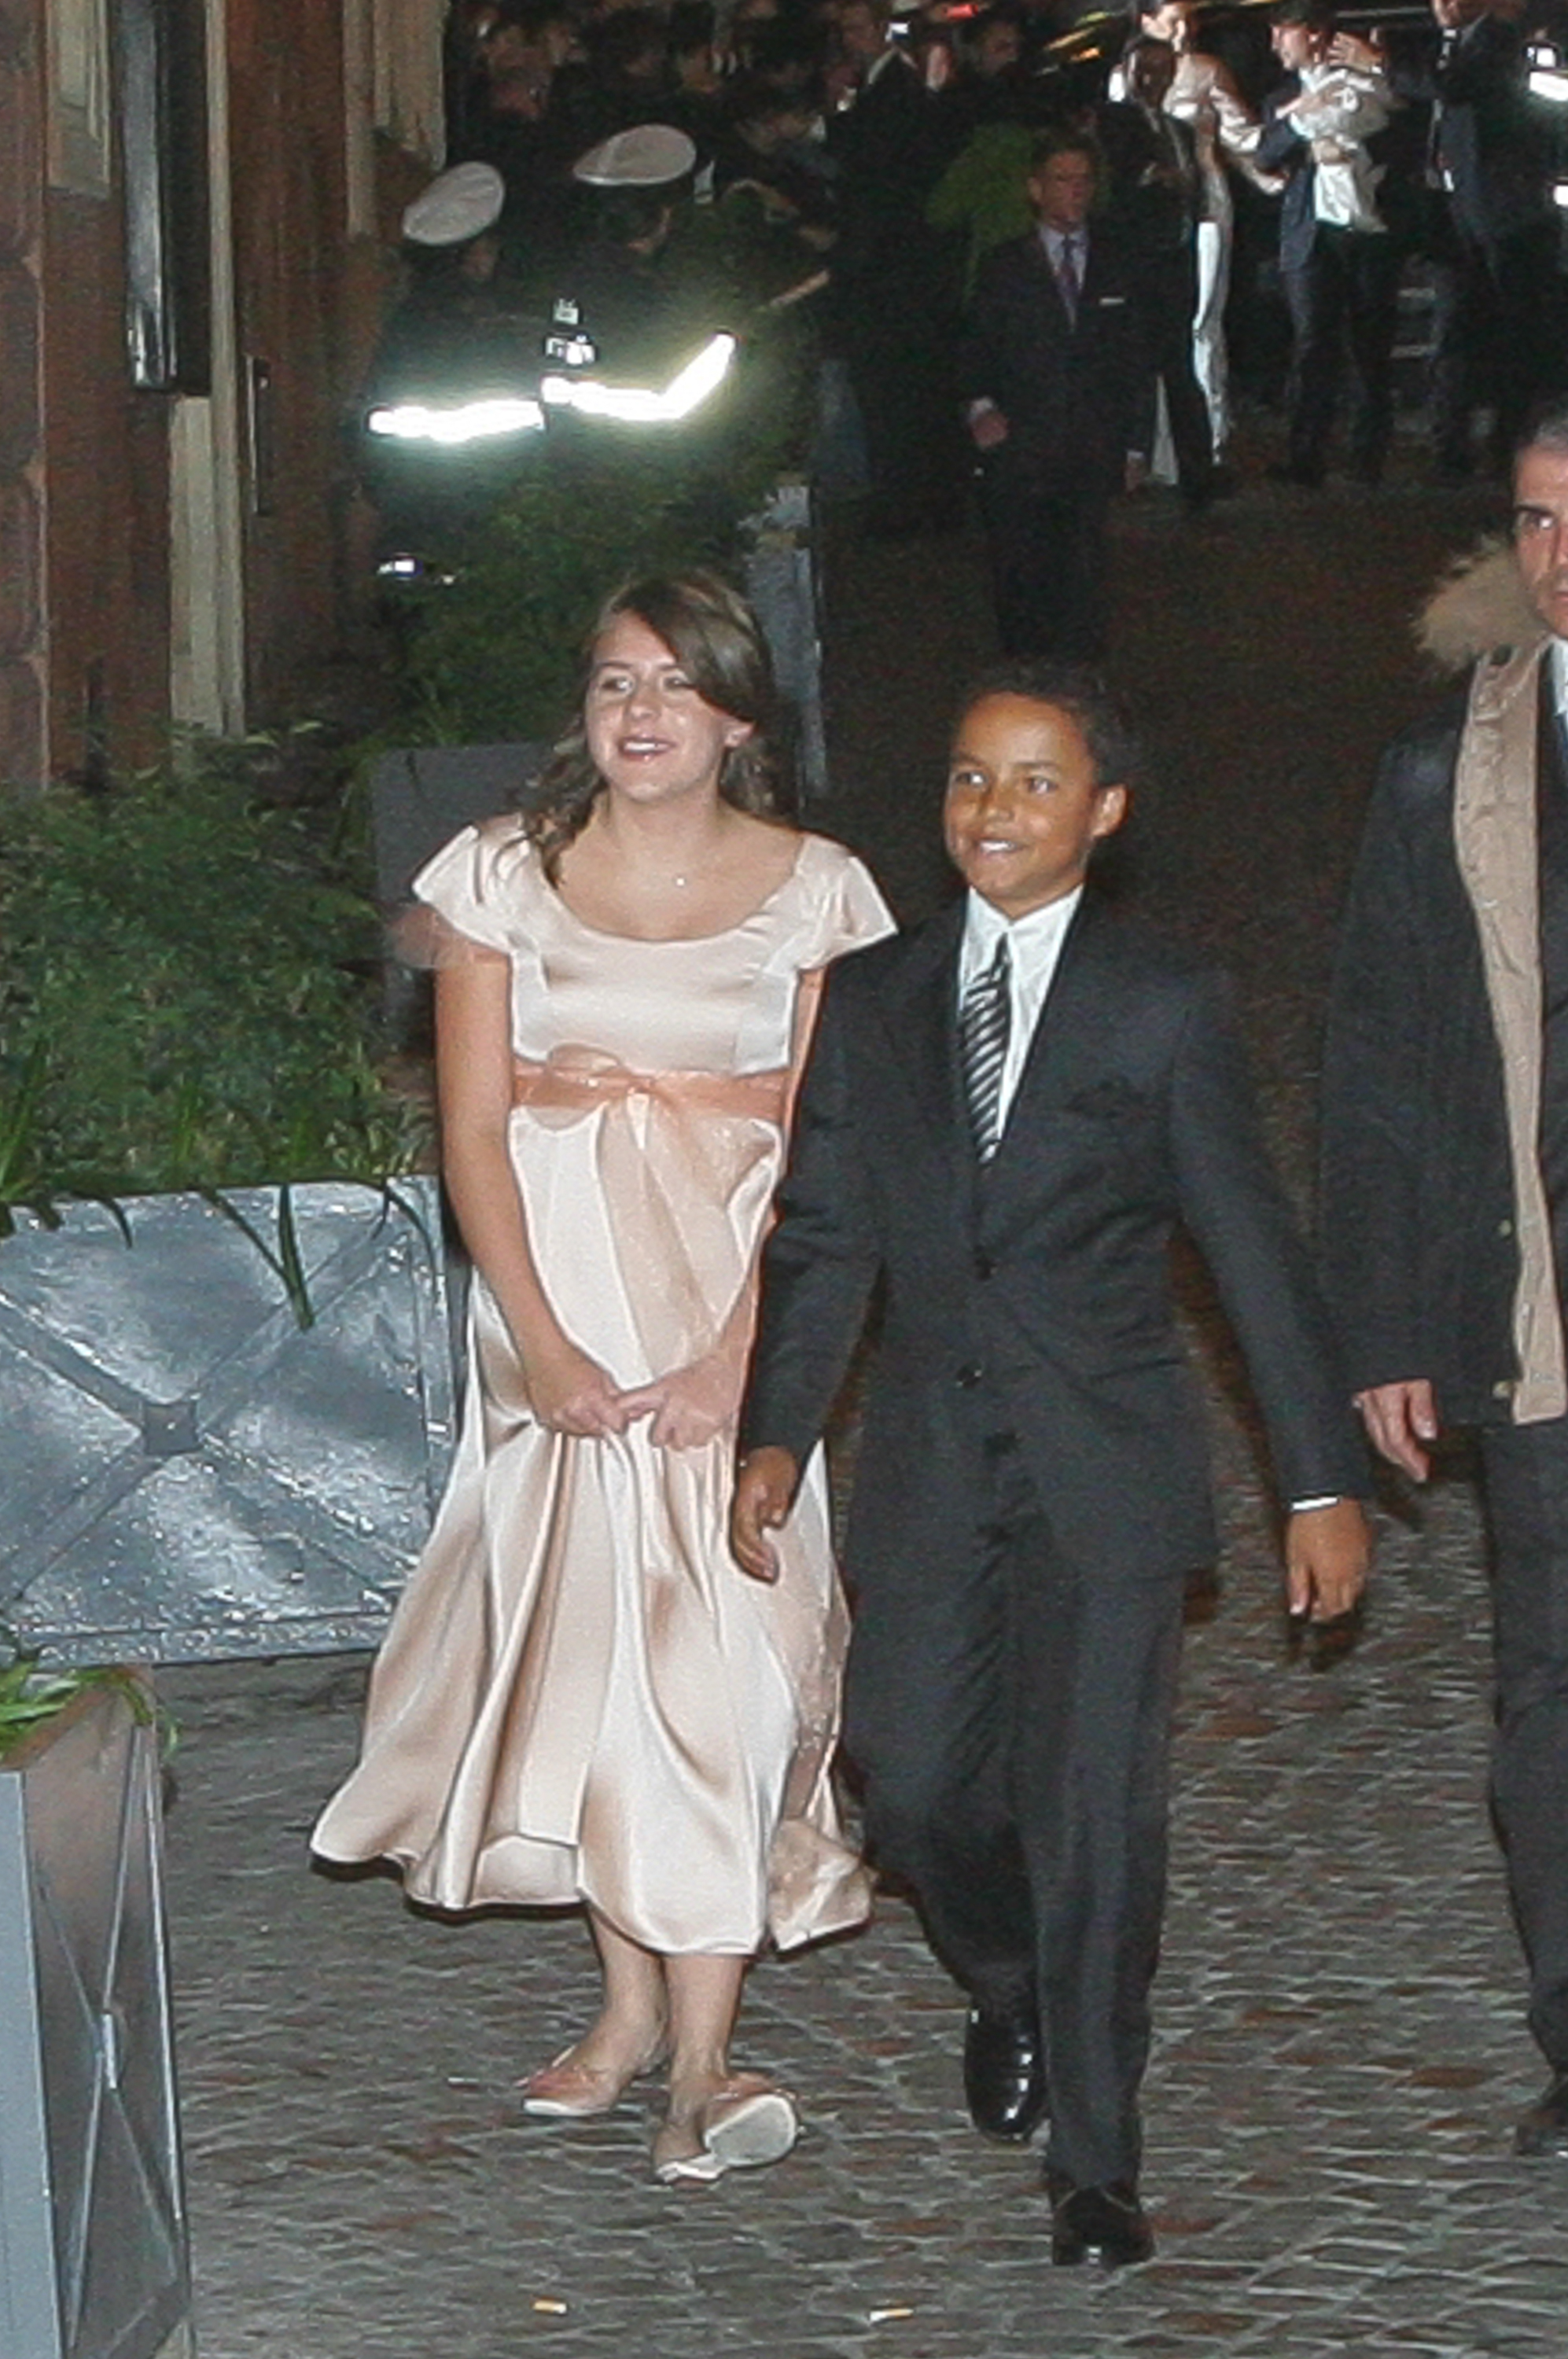 Isabella Kidman-Cruise and Connor Kidman-Cruise arrive at the 'Nino' restaurant two days ahead Tom Cruise and Katie Holmes wedding in Rome on November 16, 2006 in Rome, Italy. | Source: Getty Images